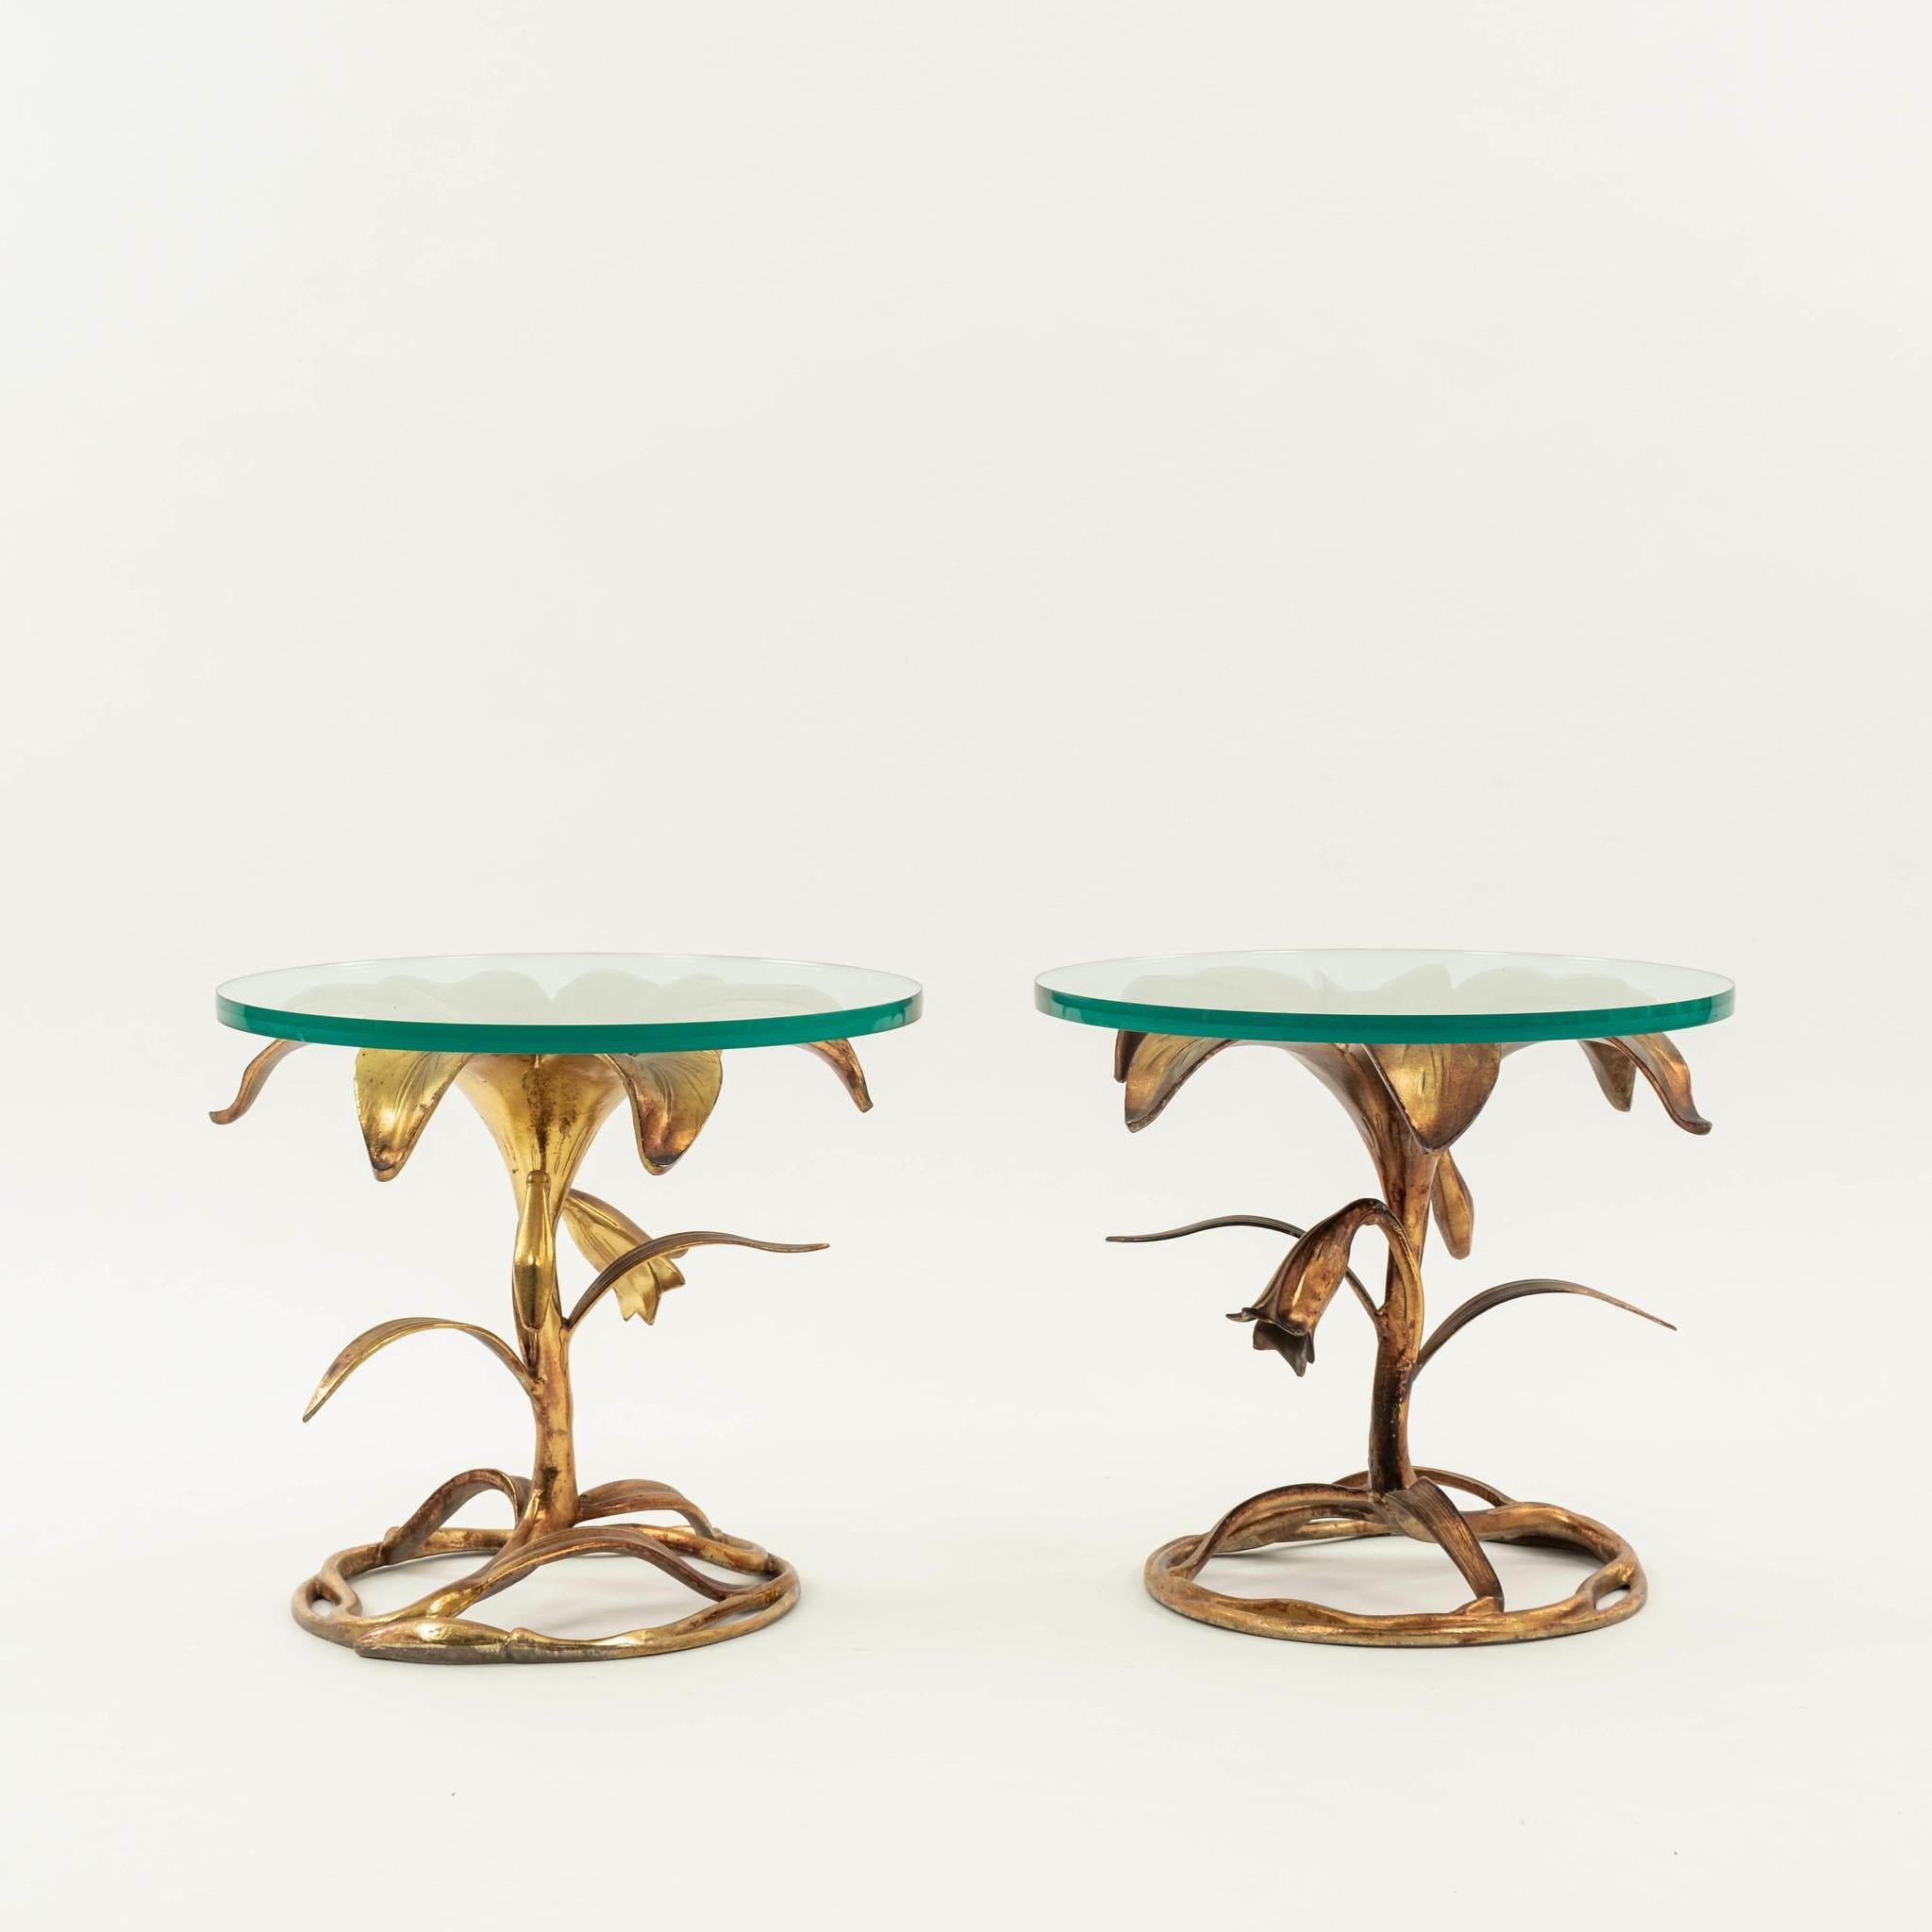 Aesthetic Movement Pair Arthur Court Gilded Lily Occassional Tables